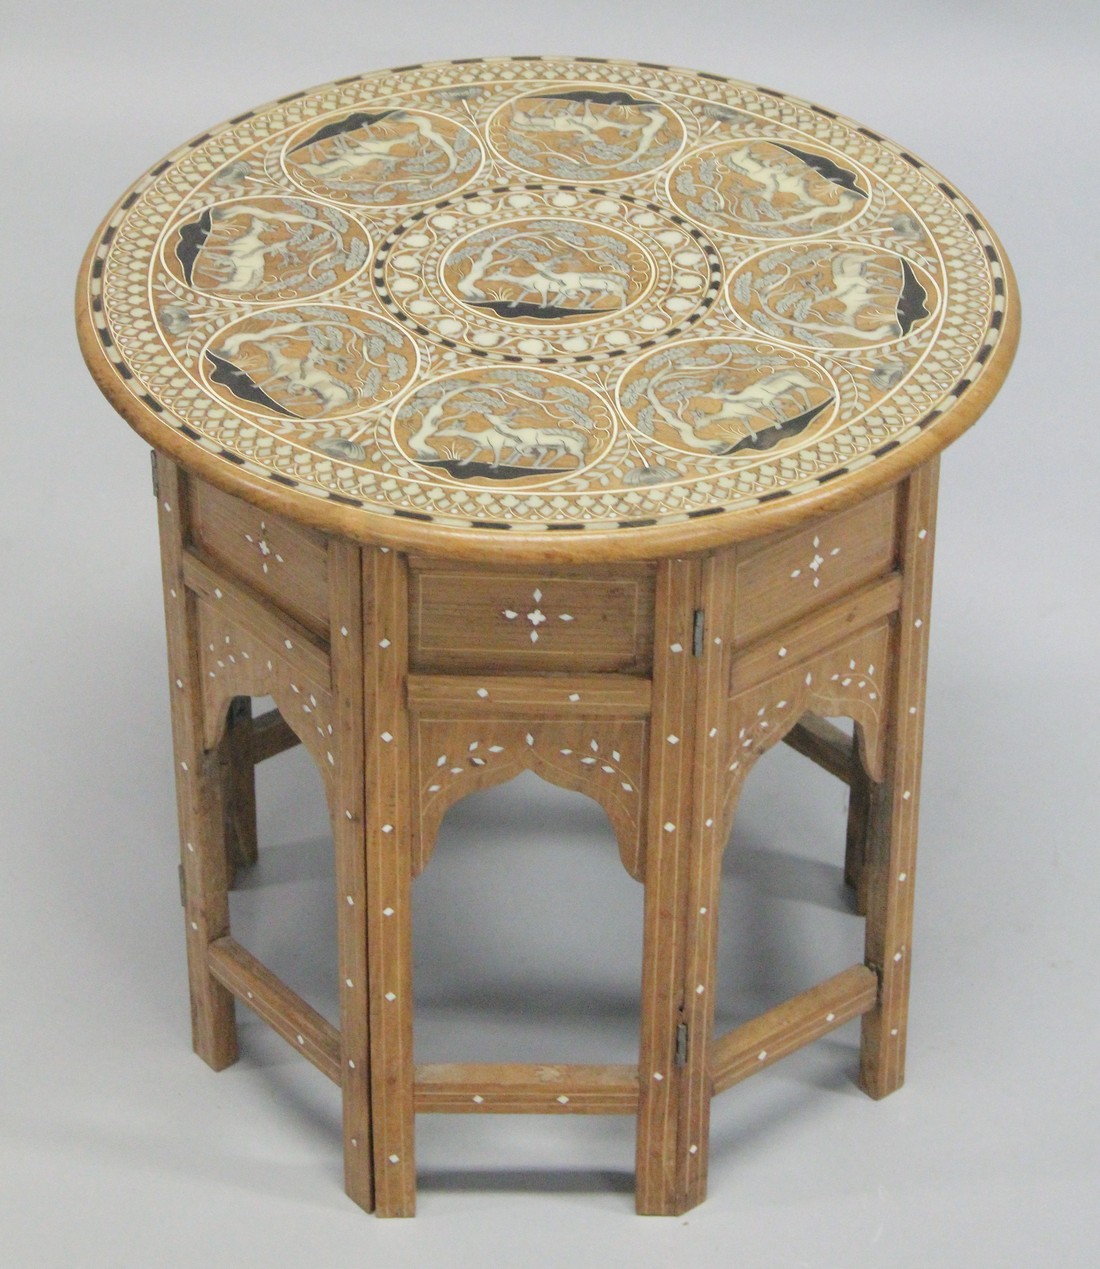 A GOOD AND UNUSUAL INDIAN BONE INLAID CIRCULAR HARDWOOD TABLE, with folding base, the top inlaid